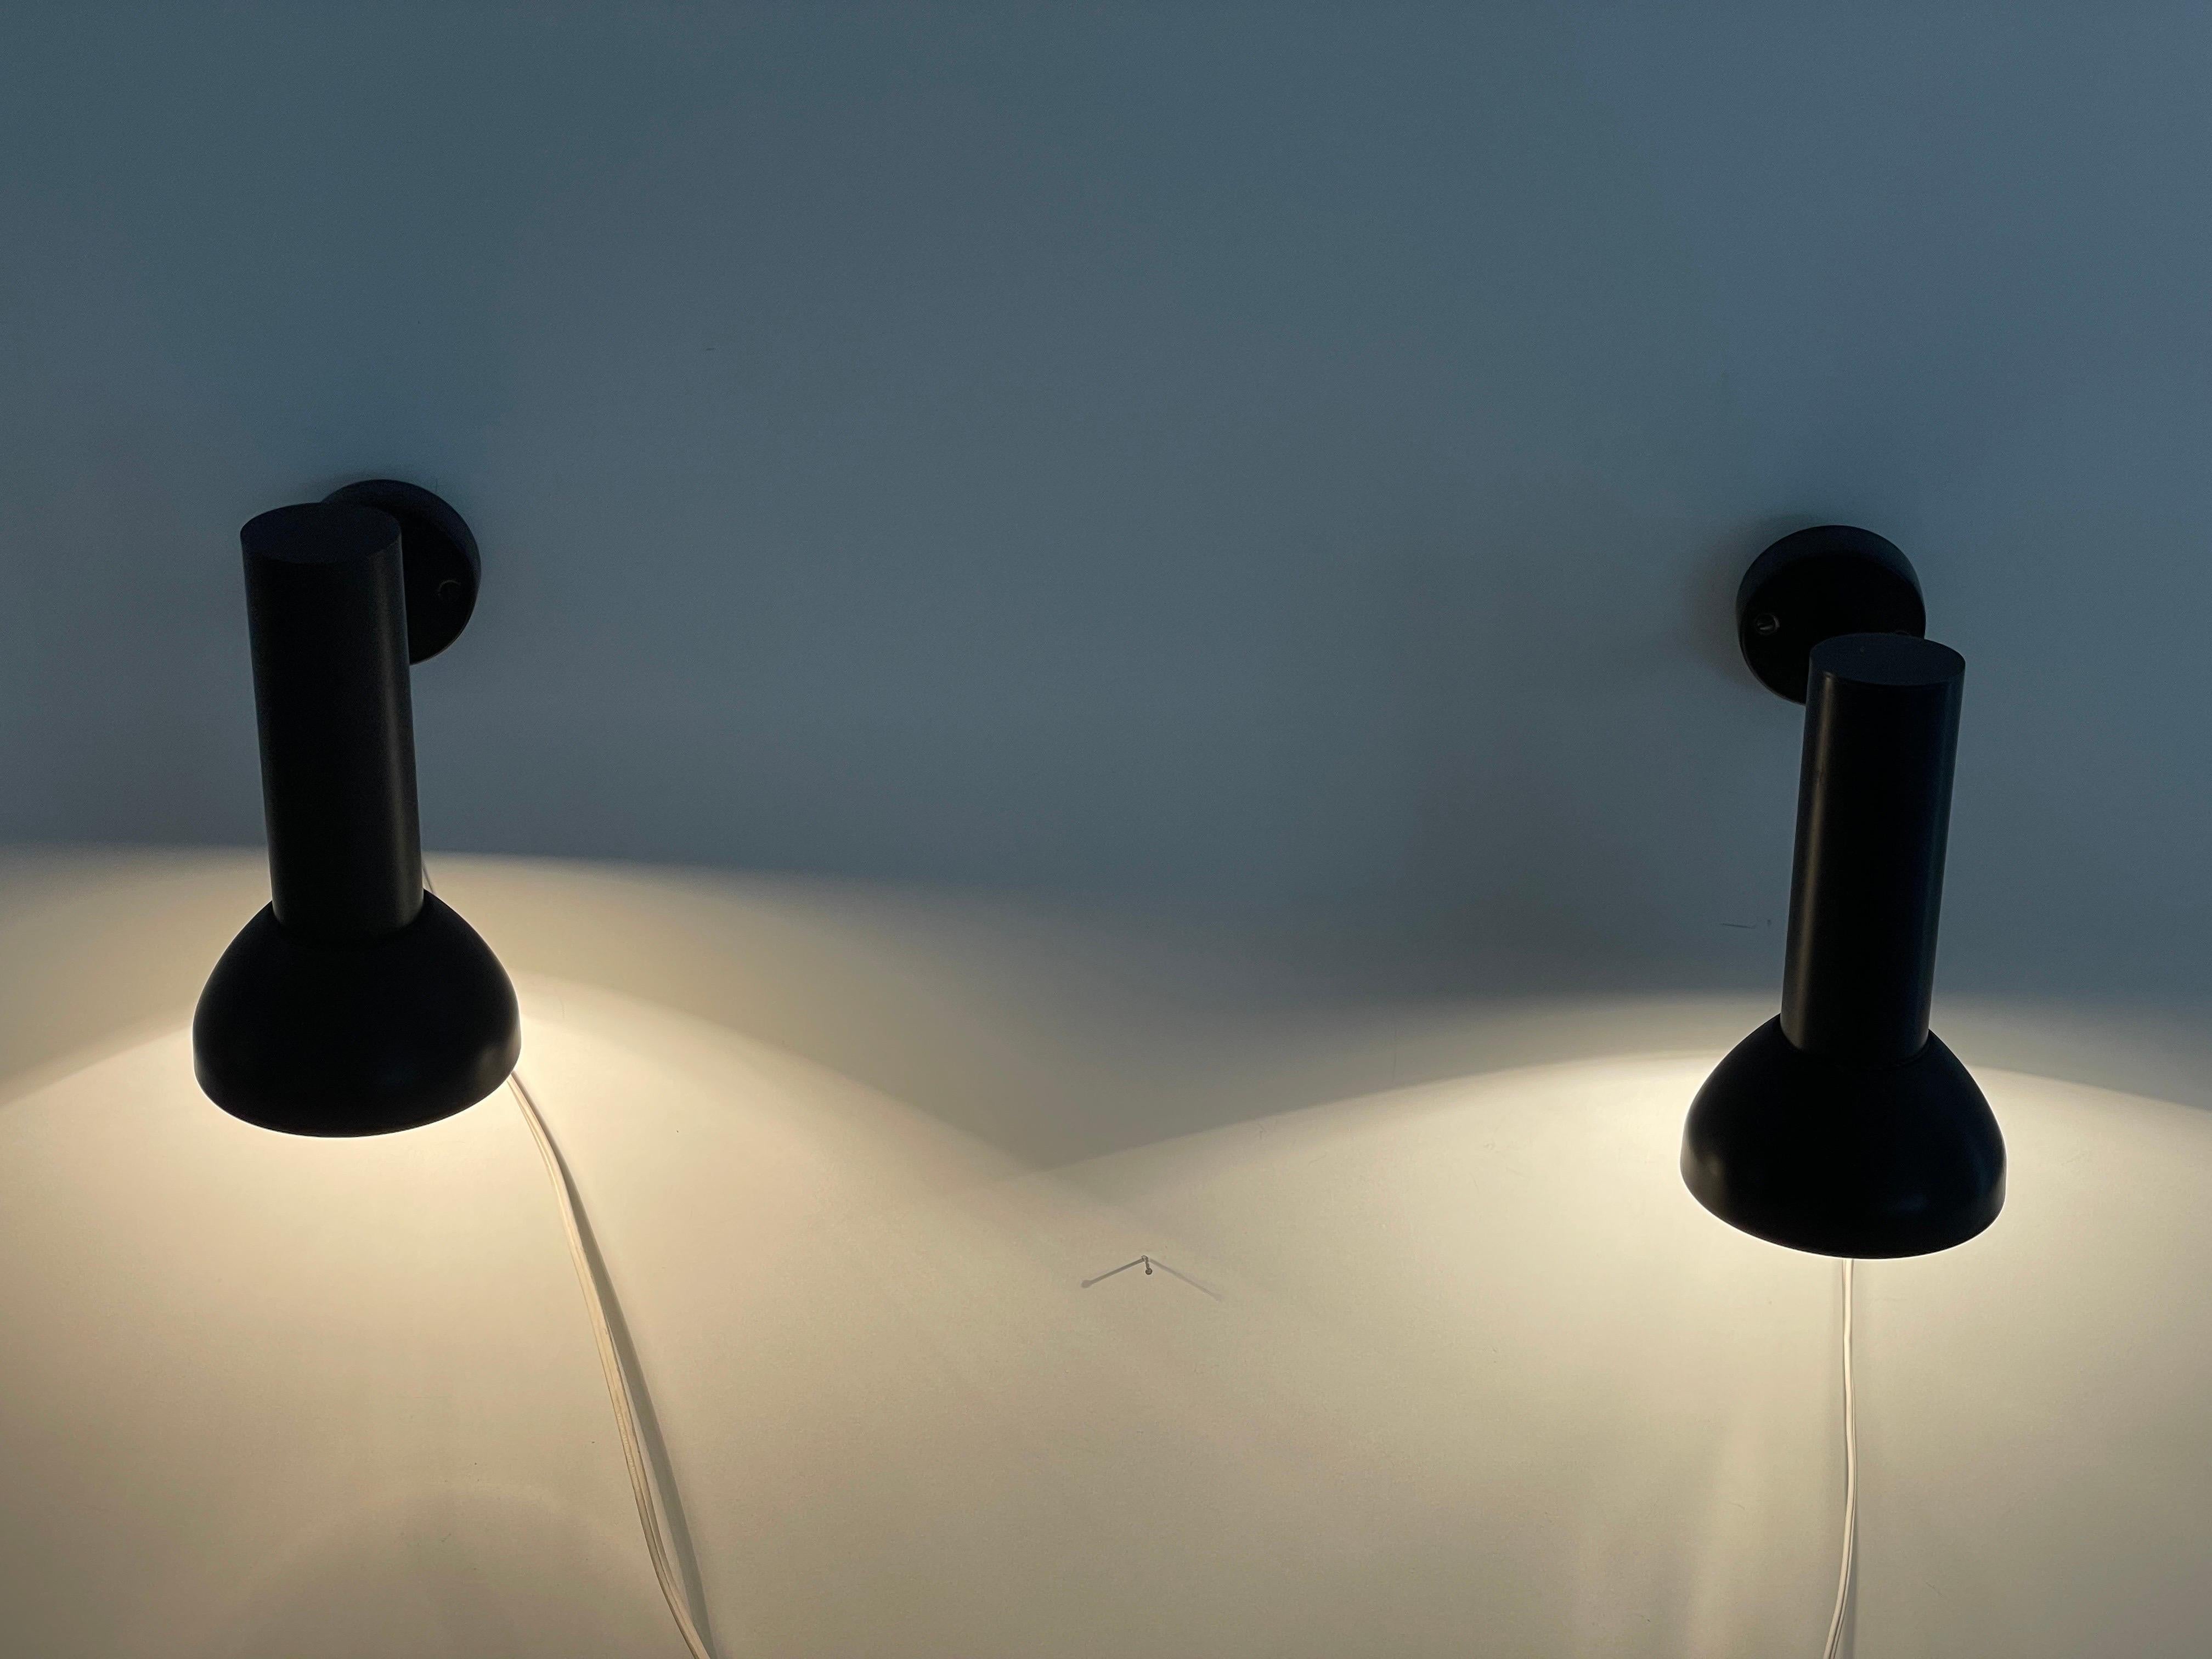 Mid-century Modern Black Pair of Sconces by Cosack Leuchten, 1960s, Germany For Sale 4